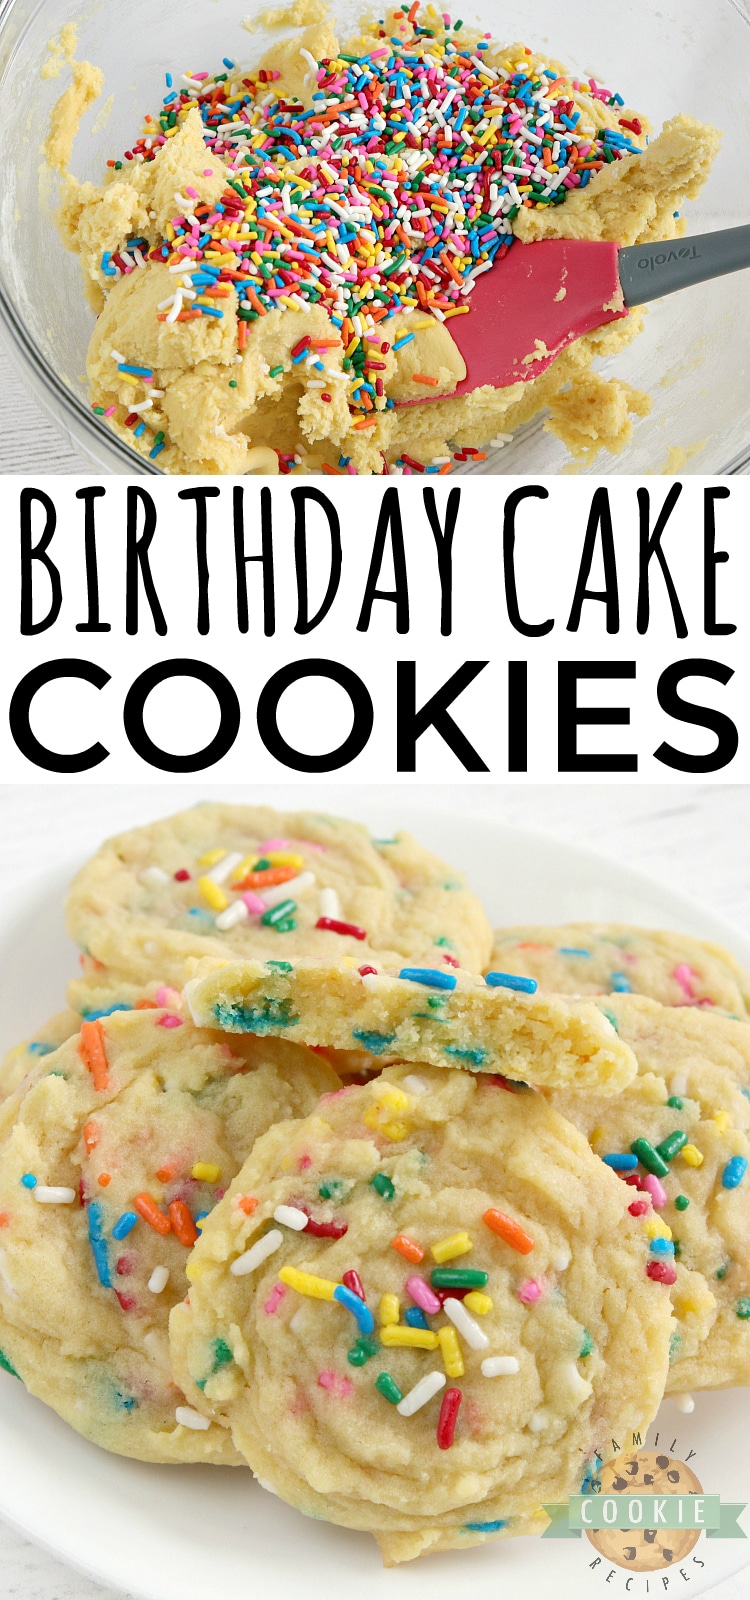 Birthday Cake Cookies are soft vanilla cookies with lots of sprinkles! This simple cookie recipe tastes like your favorite birthday cake in cookie form. via @buttergirls